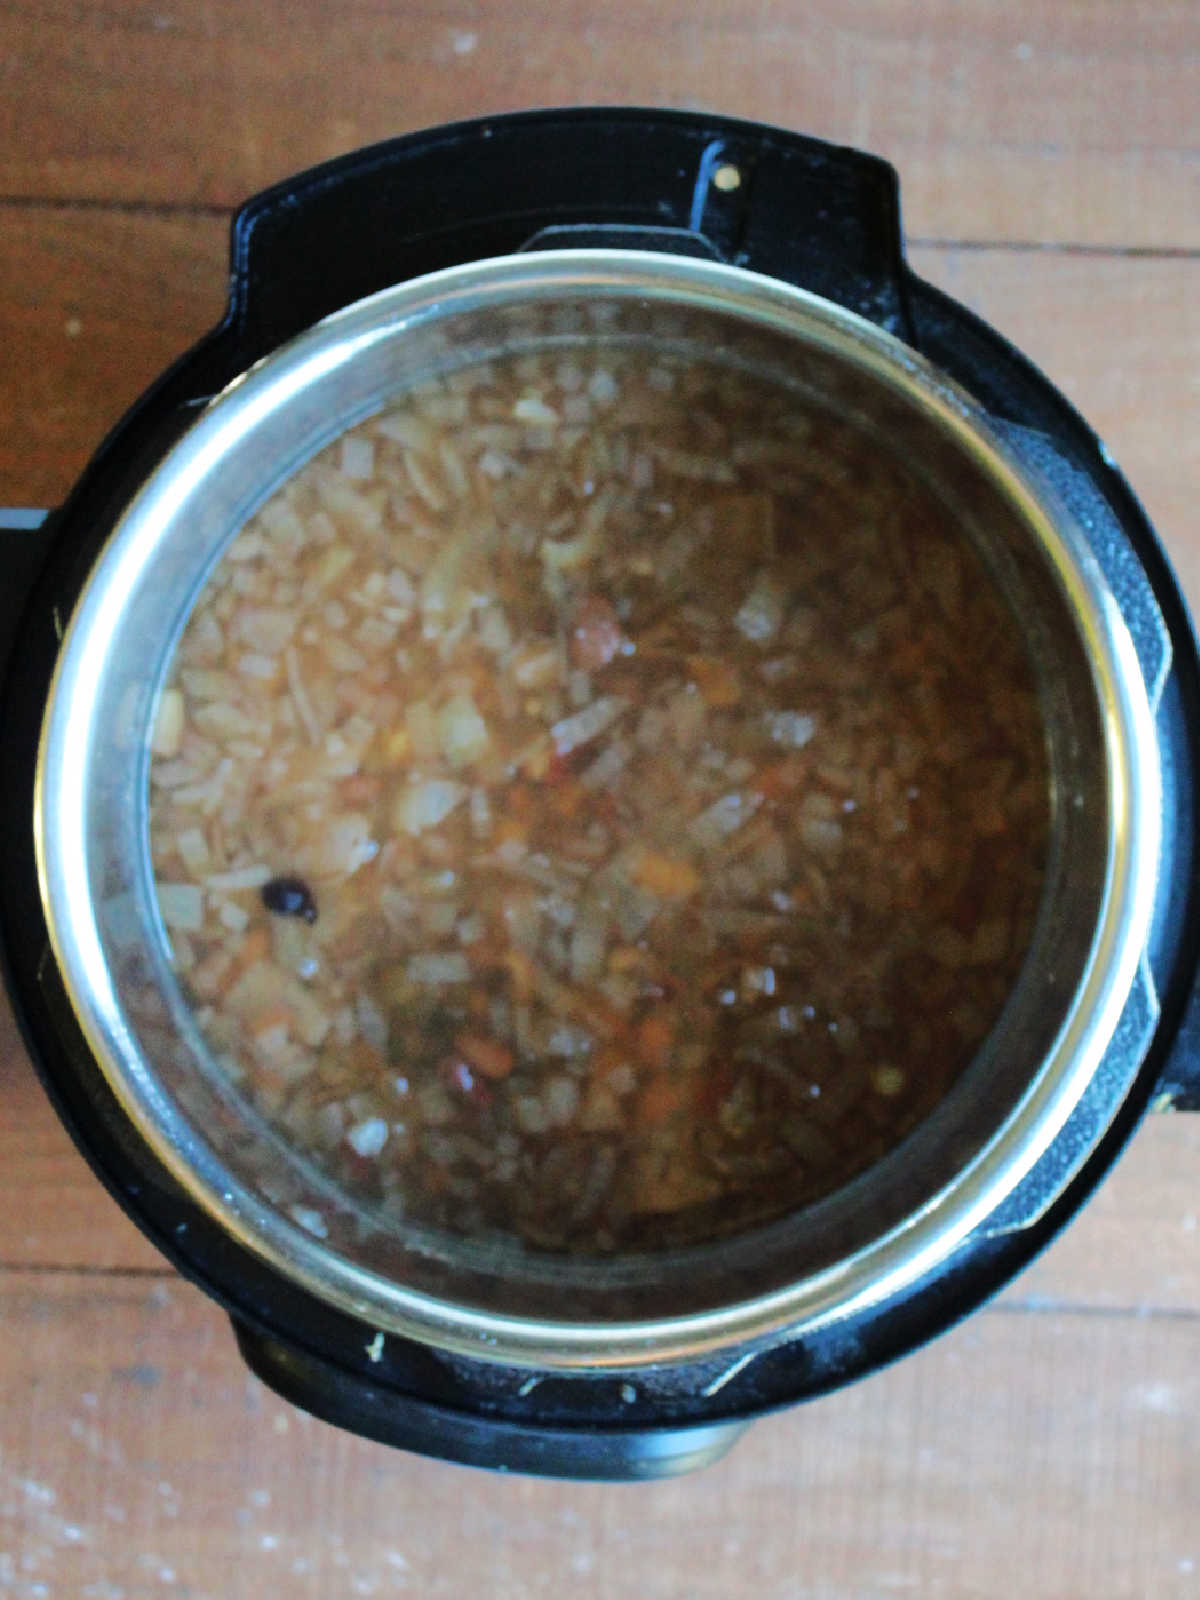 Mostly cooked bean soup in Instant Pot, ready for sausage and tomatoes.